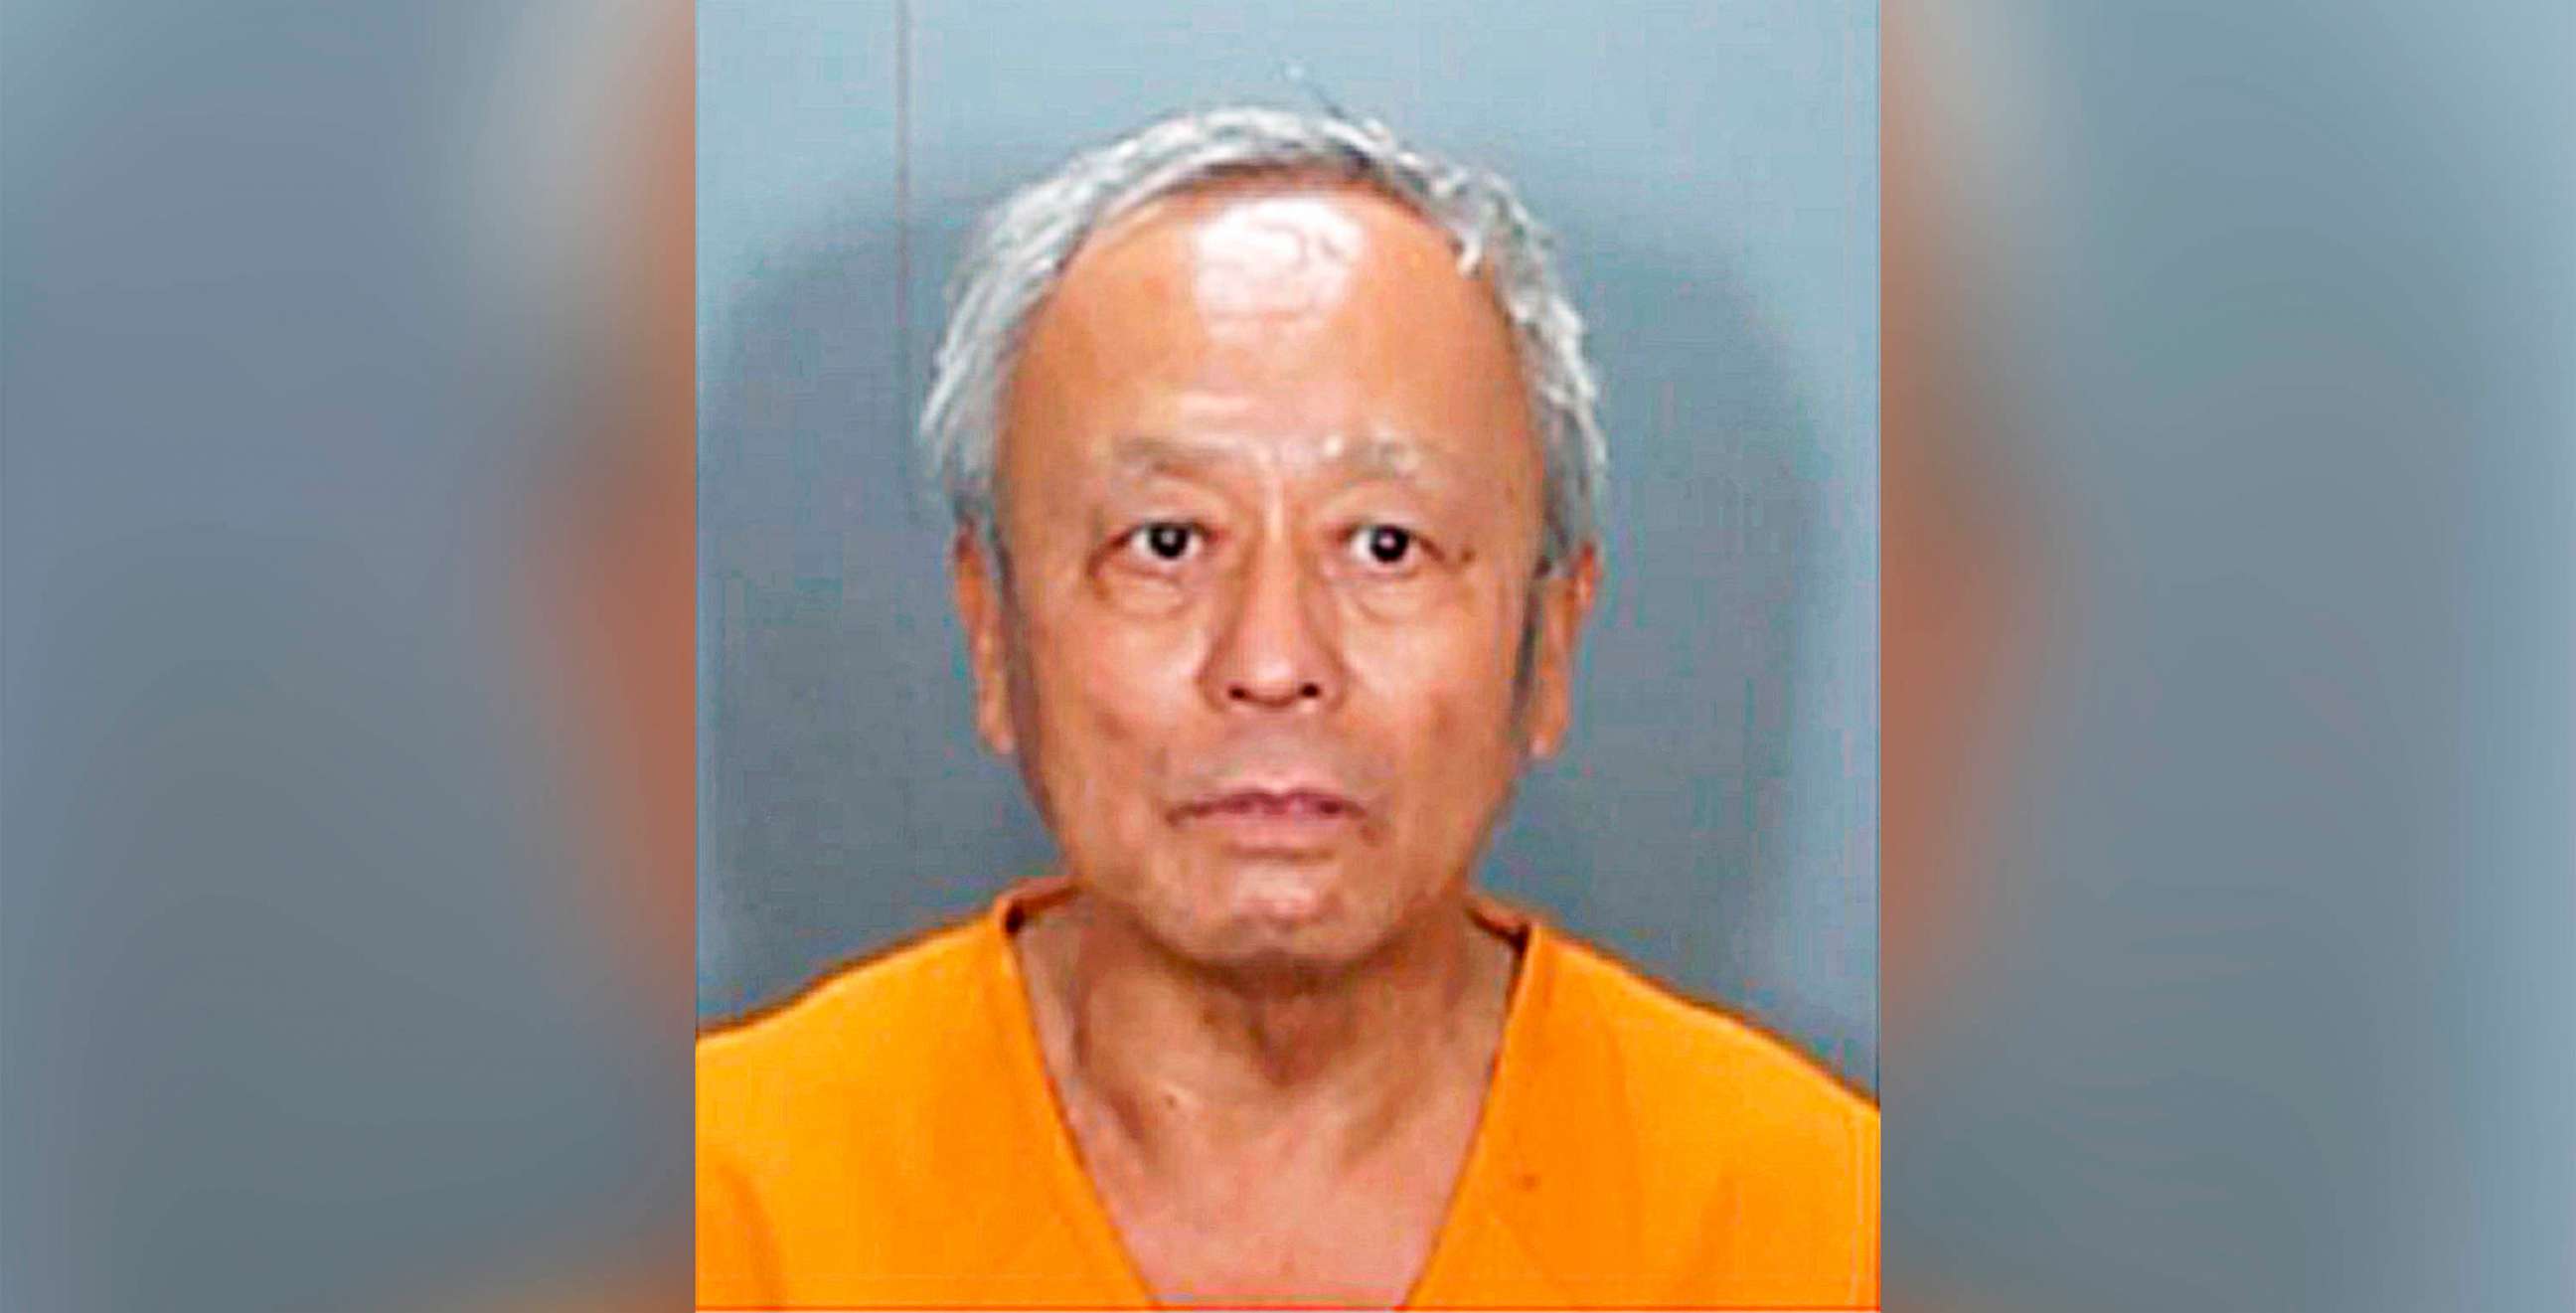 PHOTO: David Chou the accused gunman in Sunday's deadly attack at a Southern California church, is seen in a booking photo released on May 16, 2022.